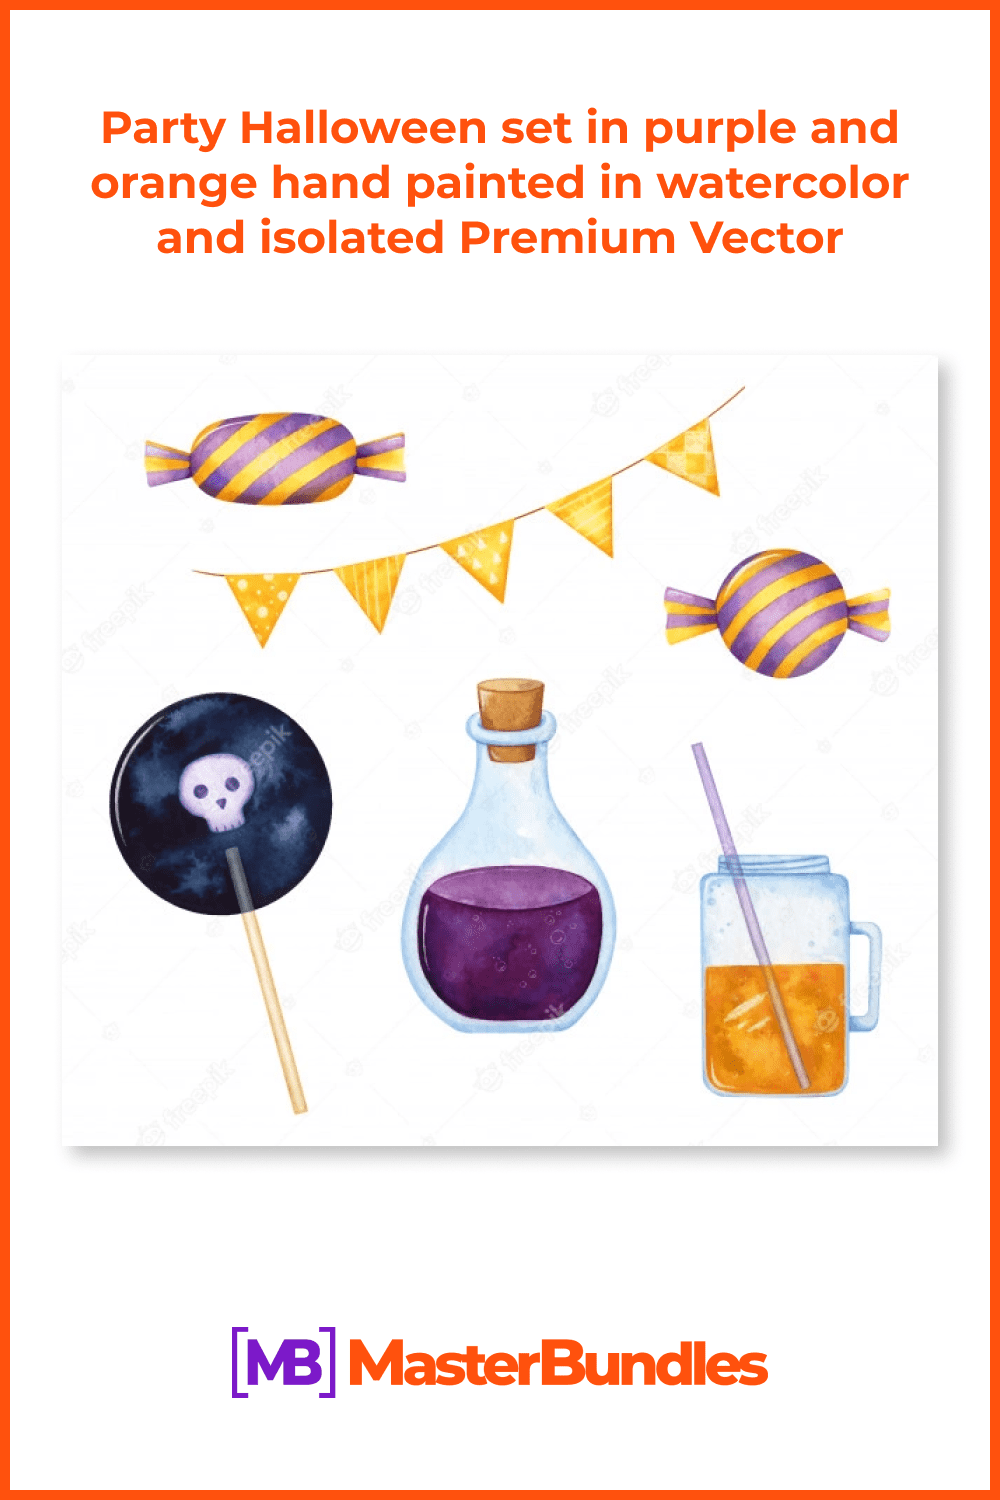 Halloween is the time to create magical potions.